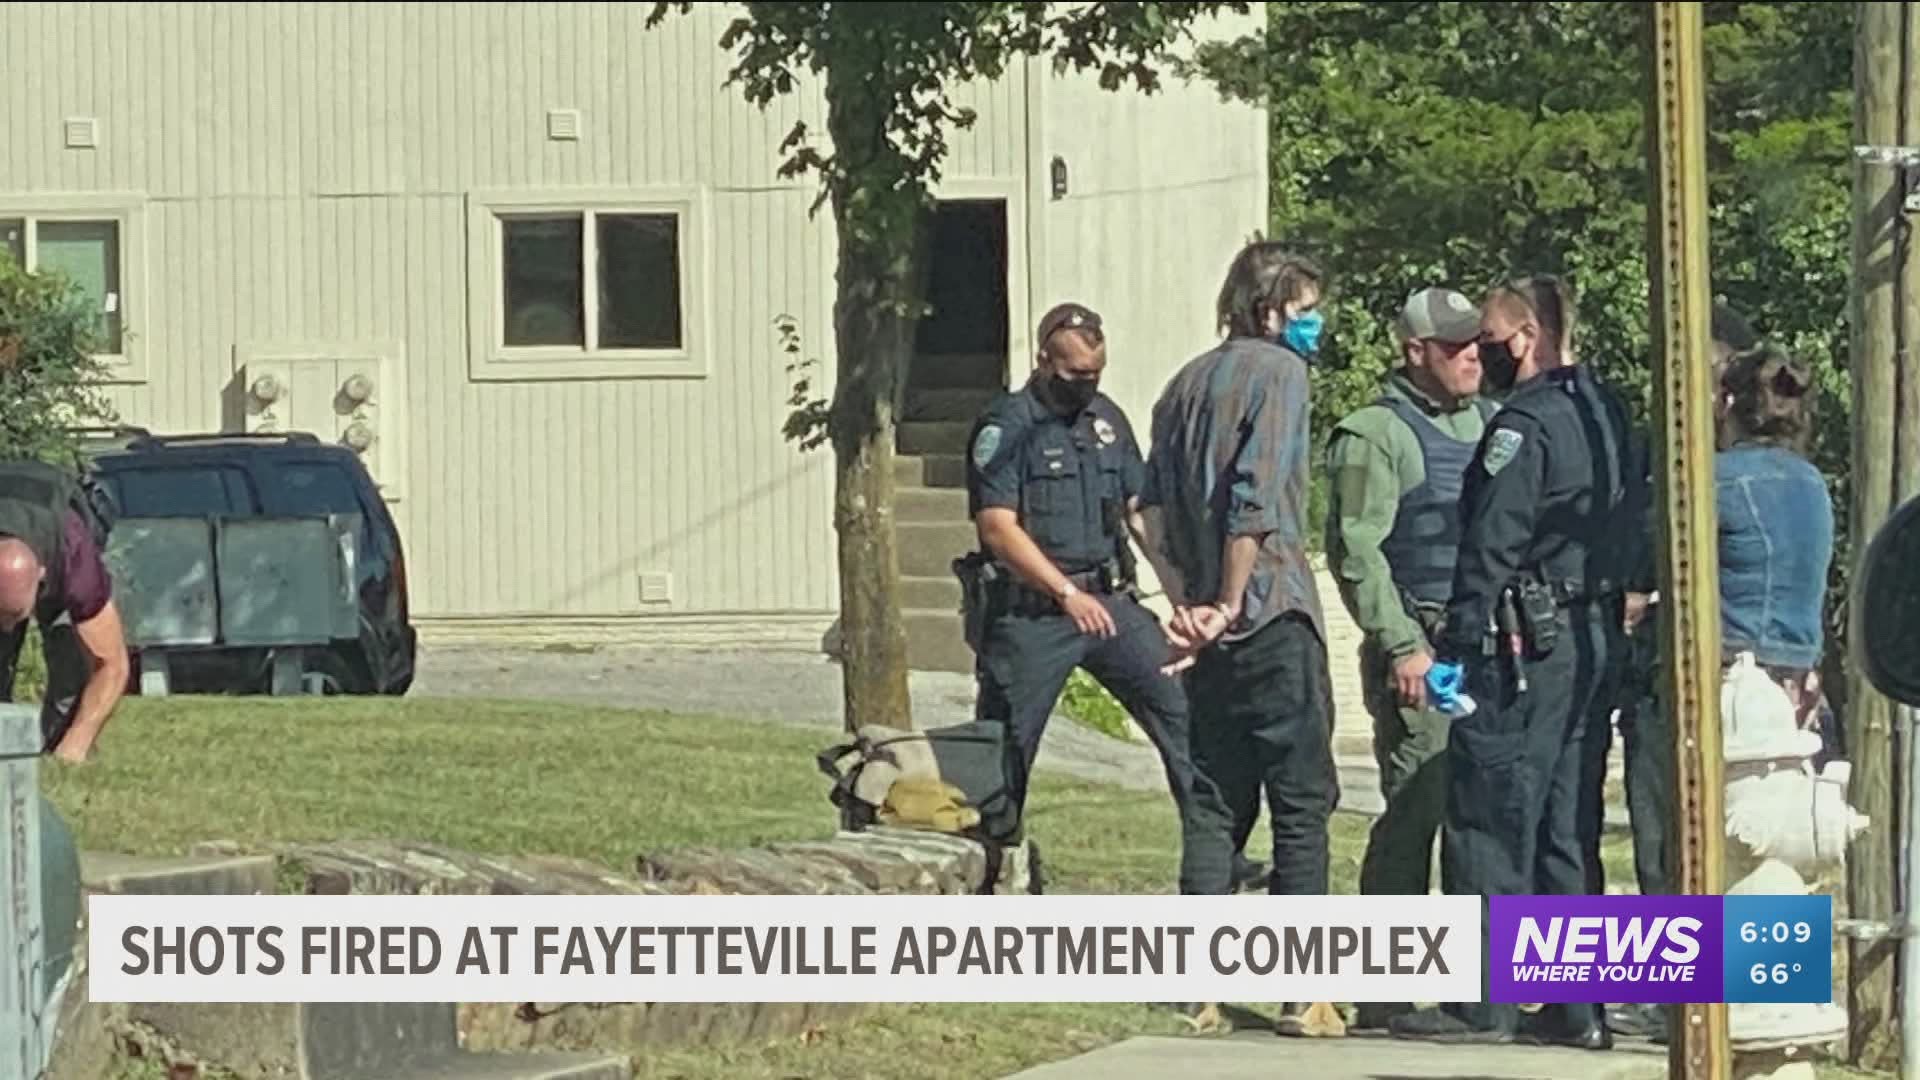 The Red Bud Apartments were evacuated Friday morning following reports that shots had been fired during a domestic disturbance. https://bit.ly/34jqns3